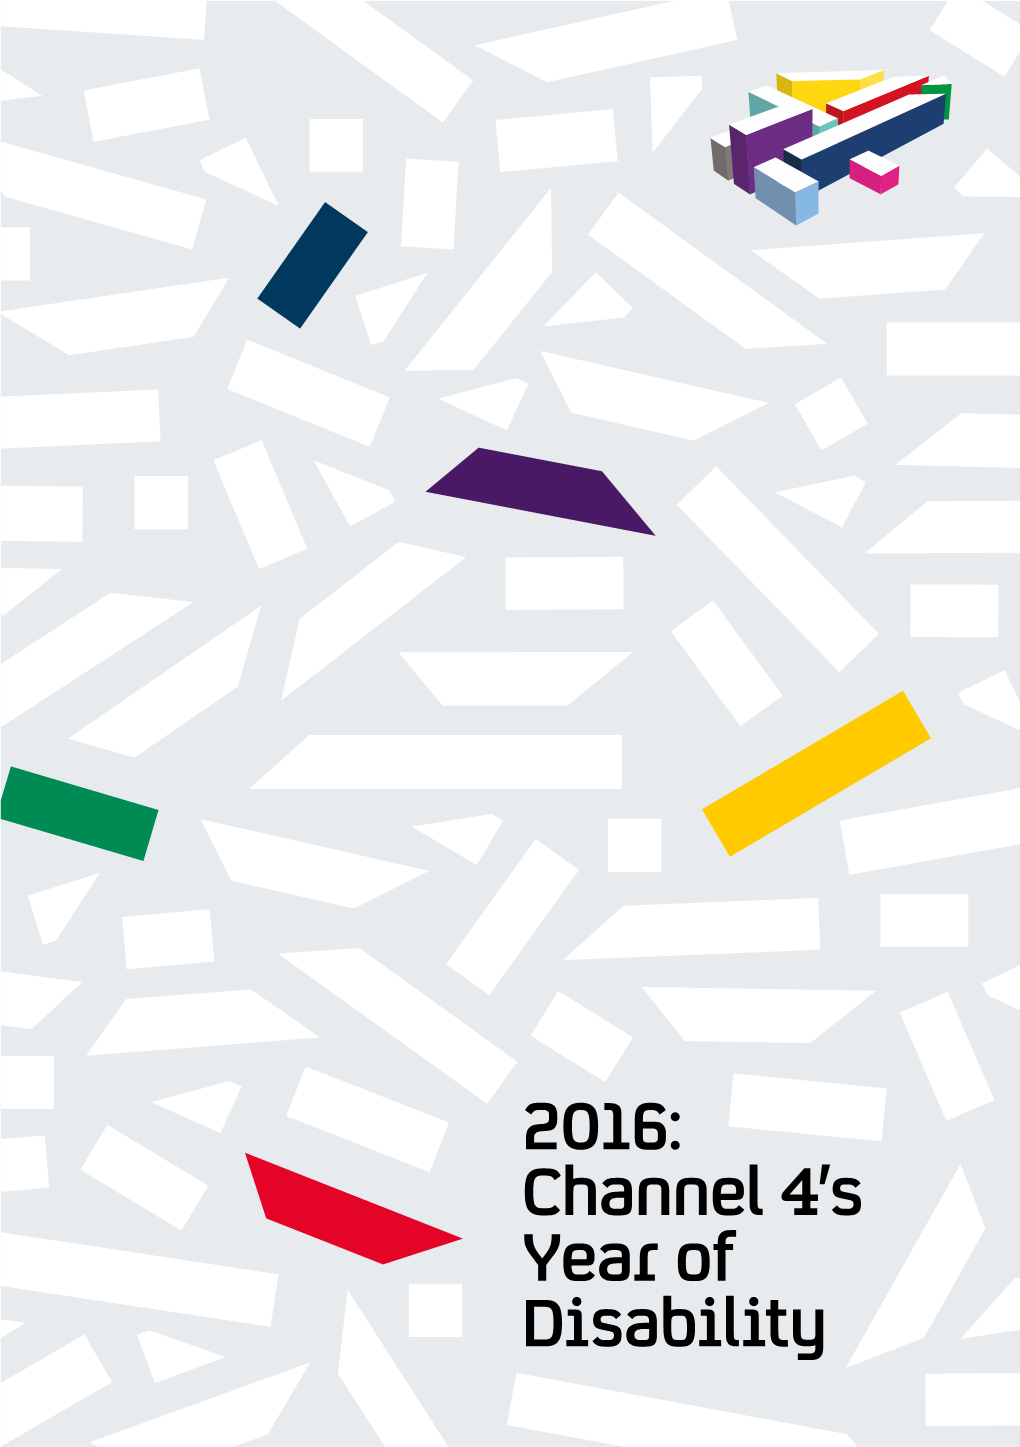 2016: Channel 4'S Year of Disability